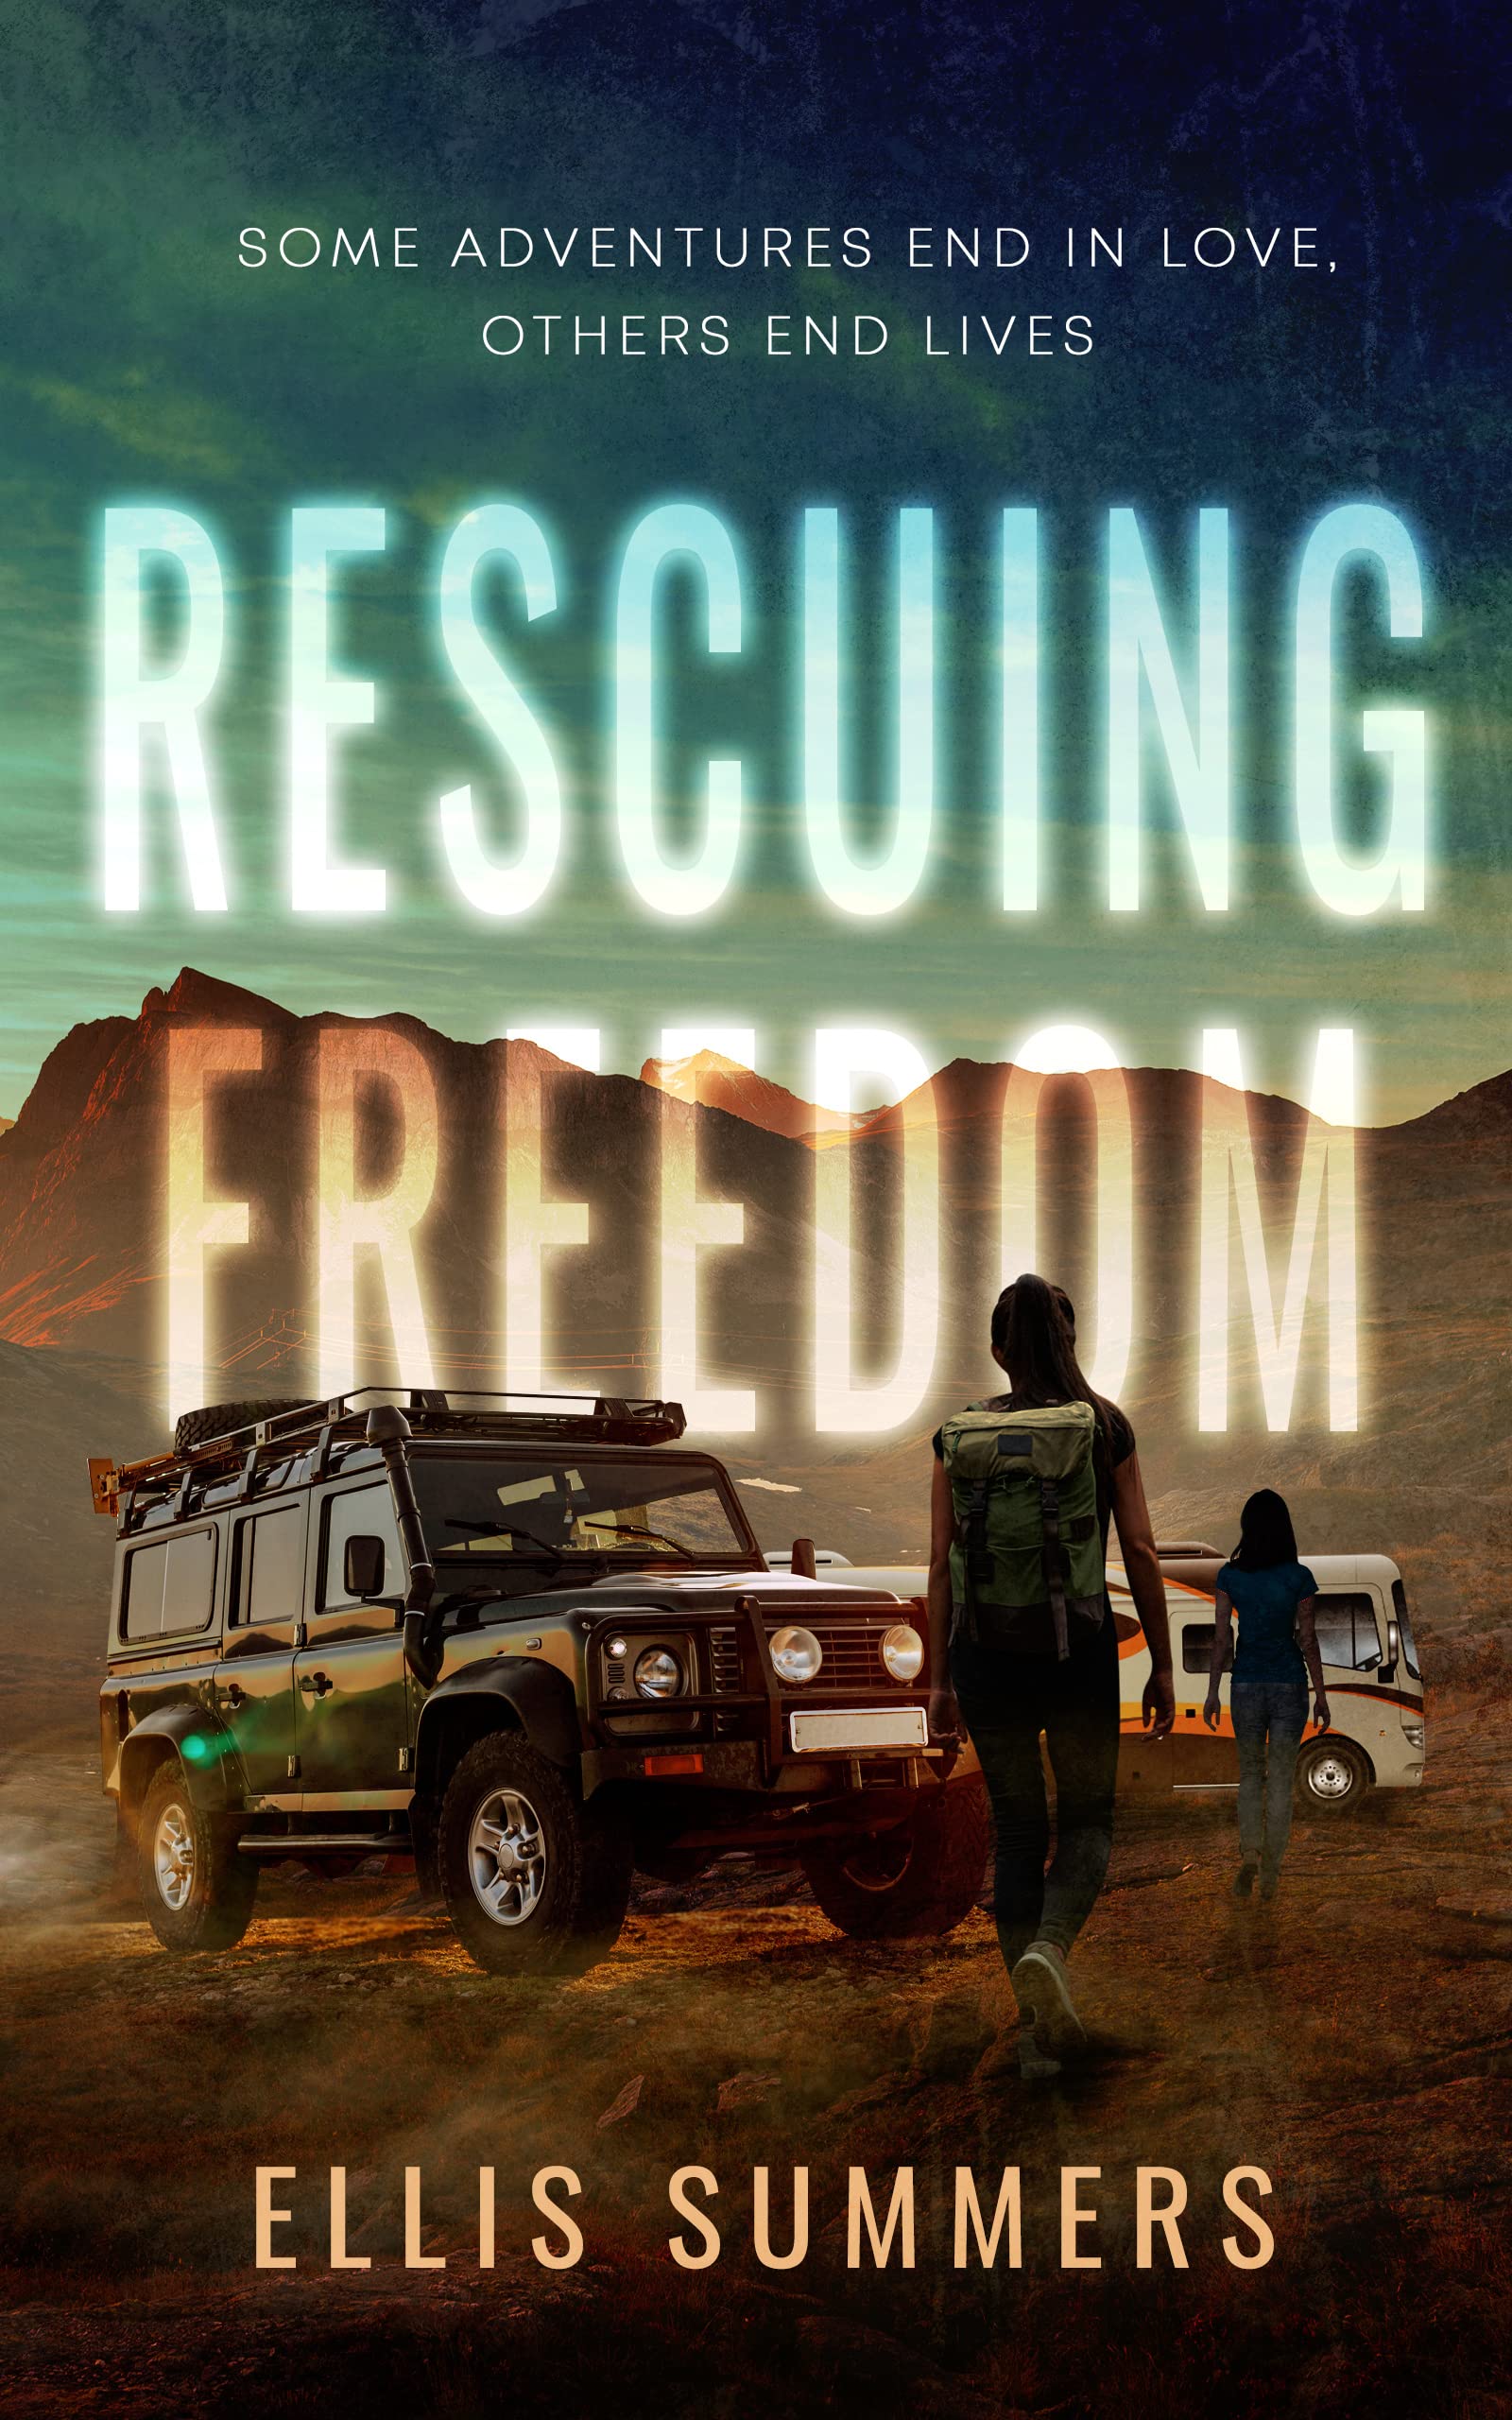 Rescuing Freedom